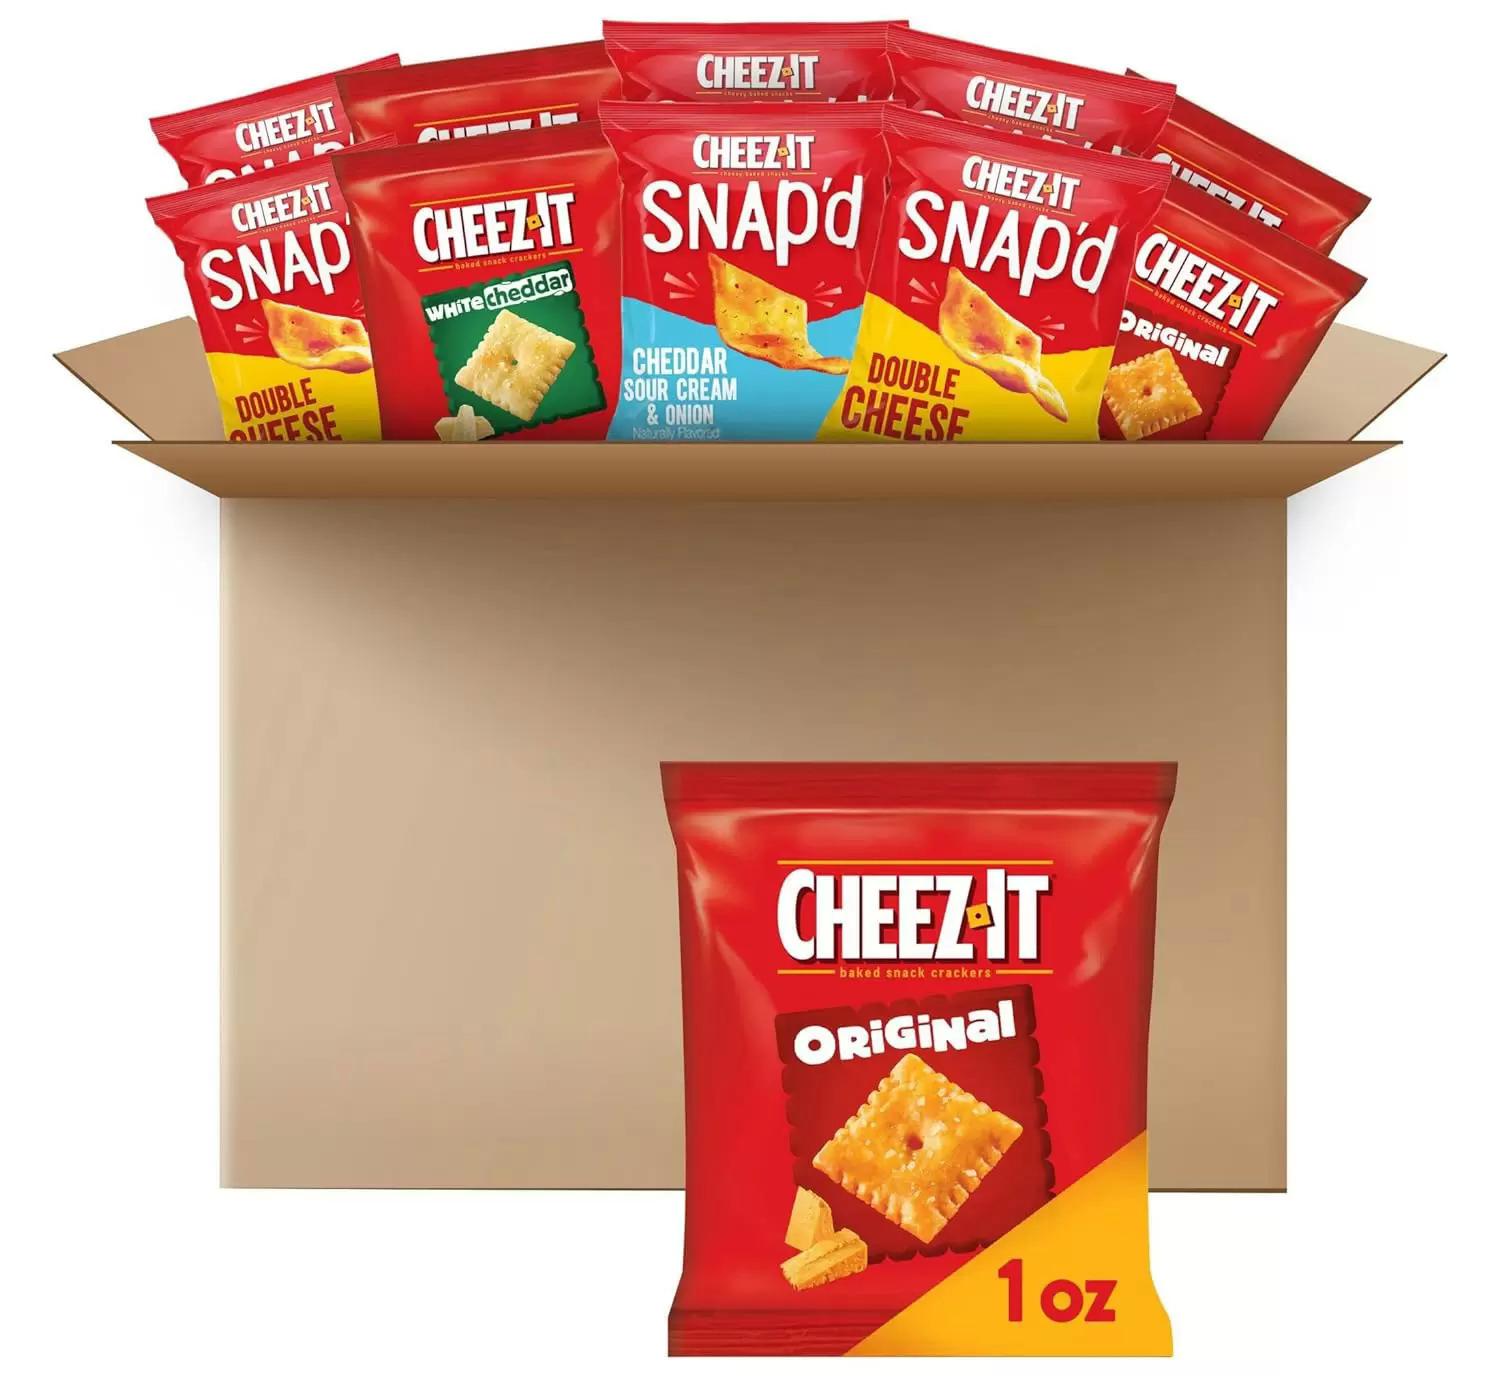 Cheez-It Cheese Crackers Baked Snack Crackers 42 Pack for $13.64